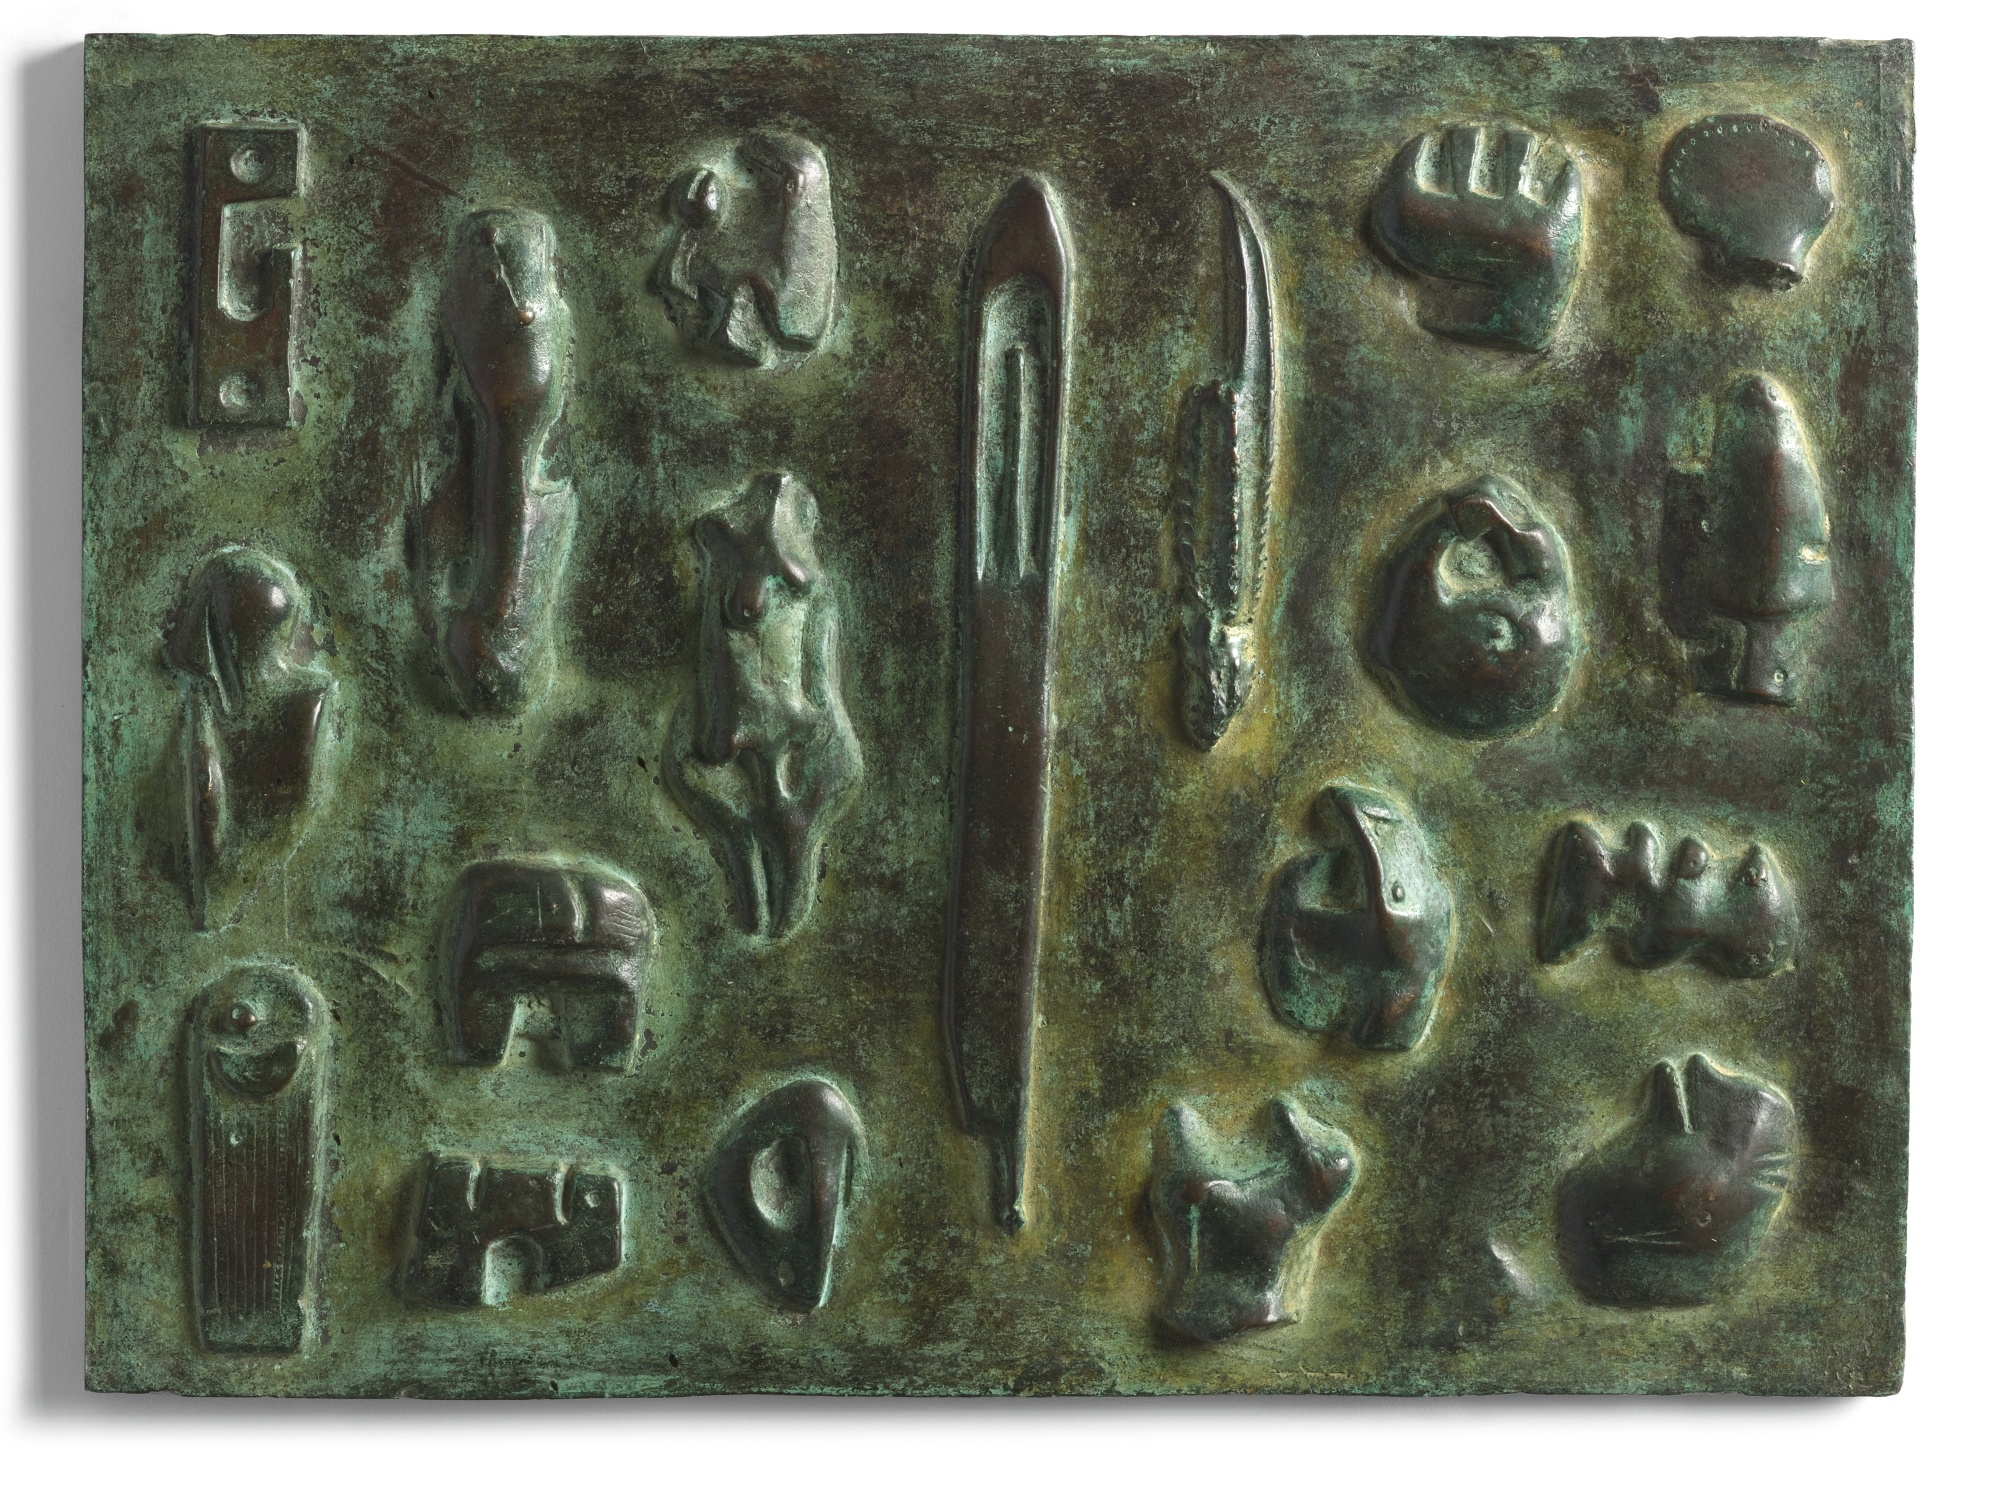 WALL RELIEF, MAQUETTE NO. 6 by Henry Moore, 1955